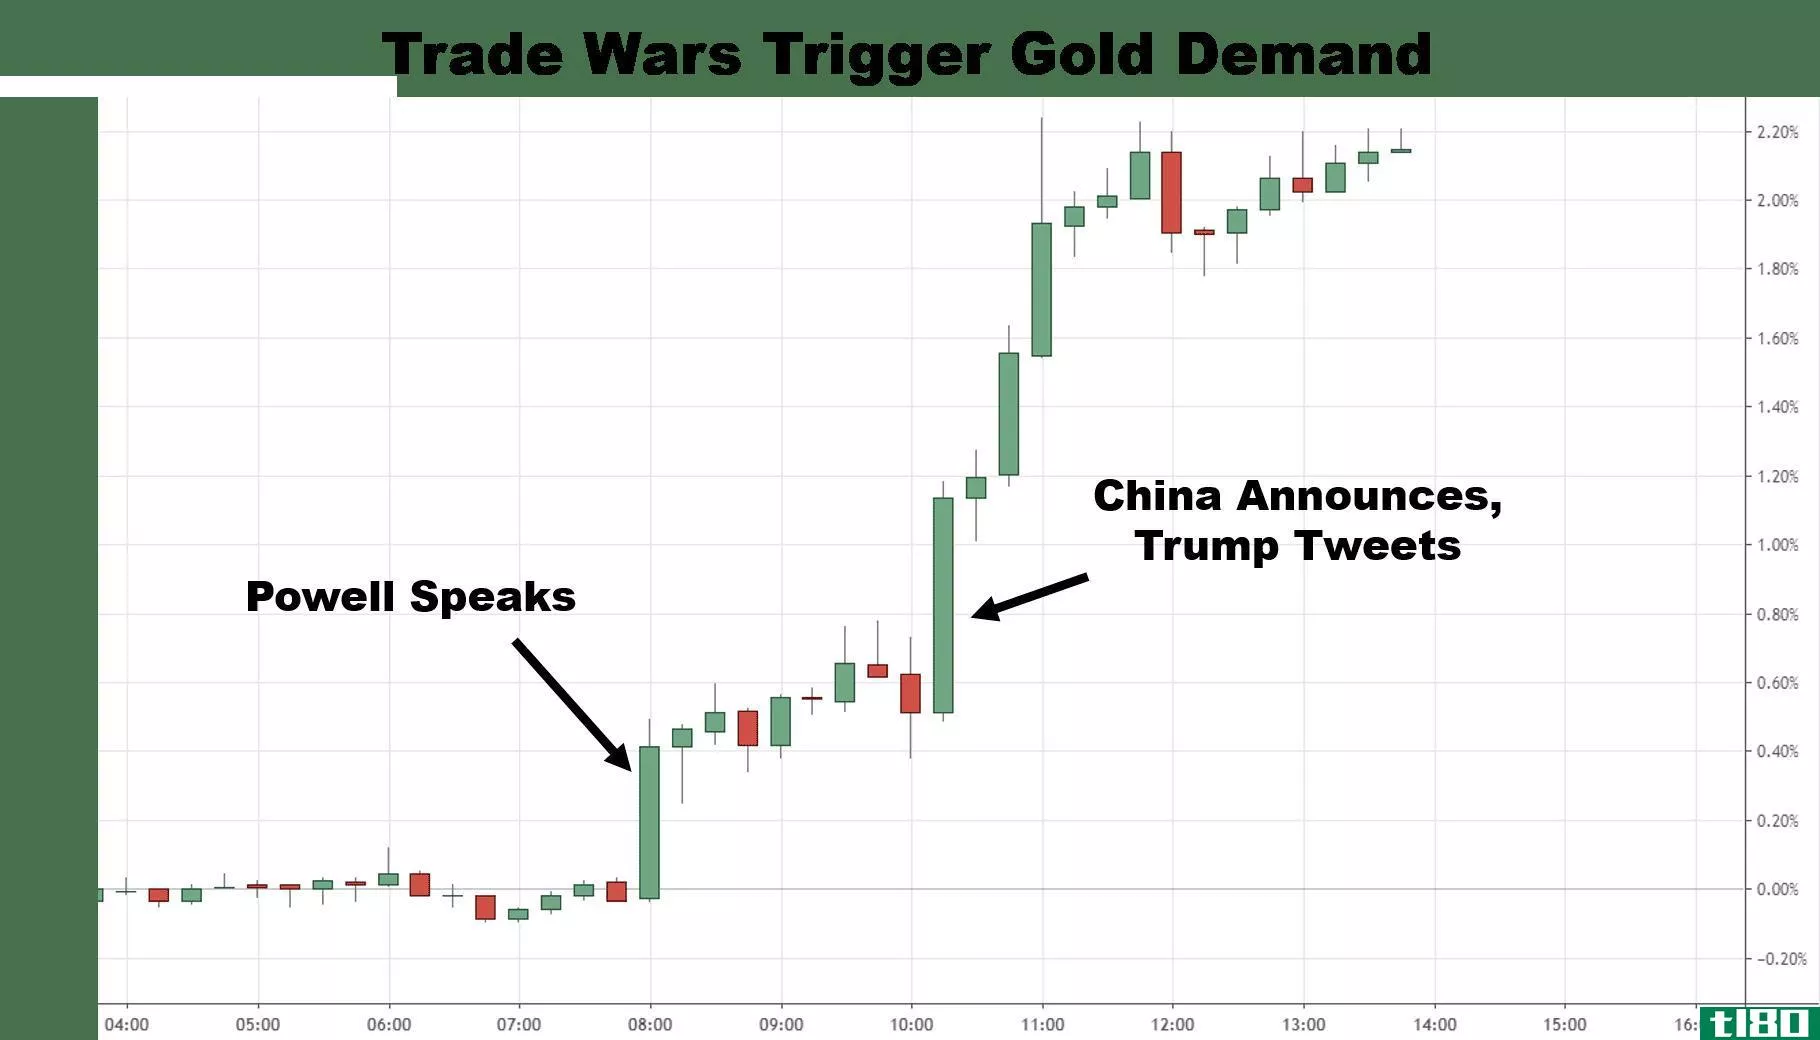 15-minute chart showing the reaction of gold prices to trade war developments